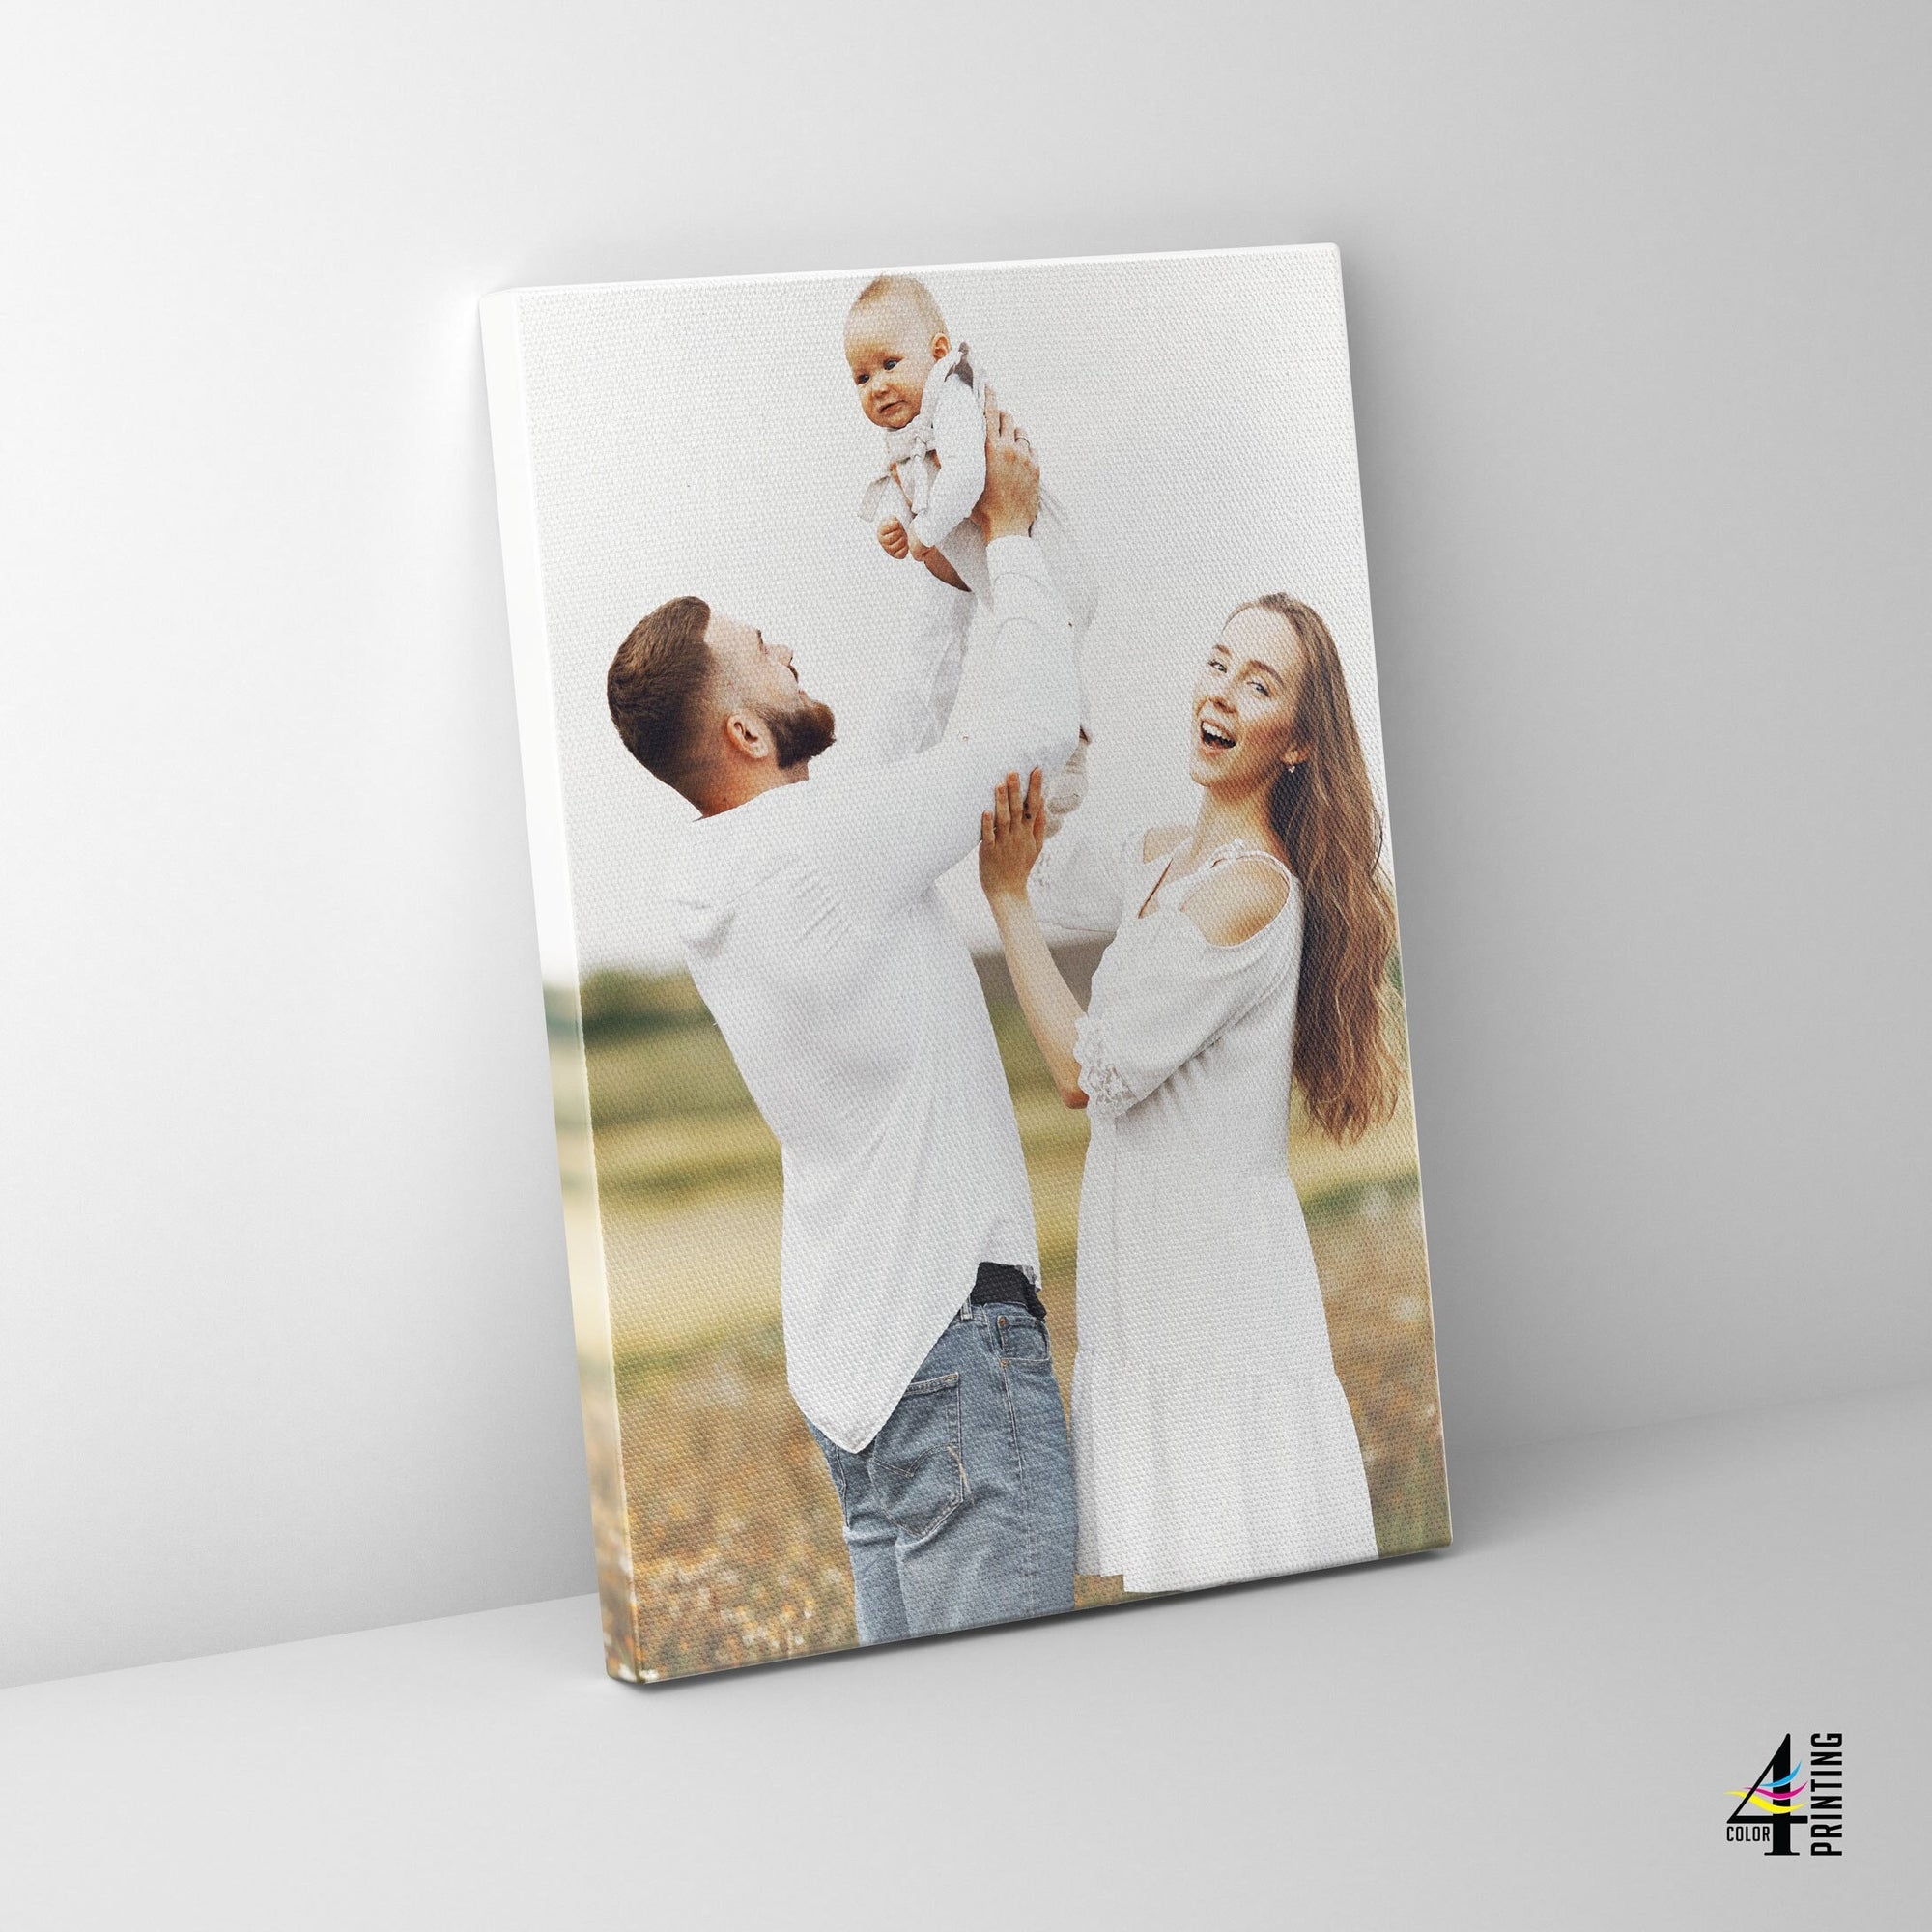 Quickly transform your favorite picture into a piece of artwork on canvas.